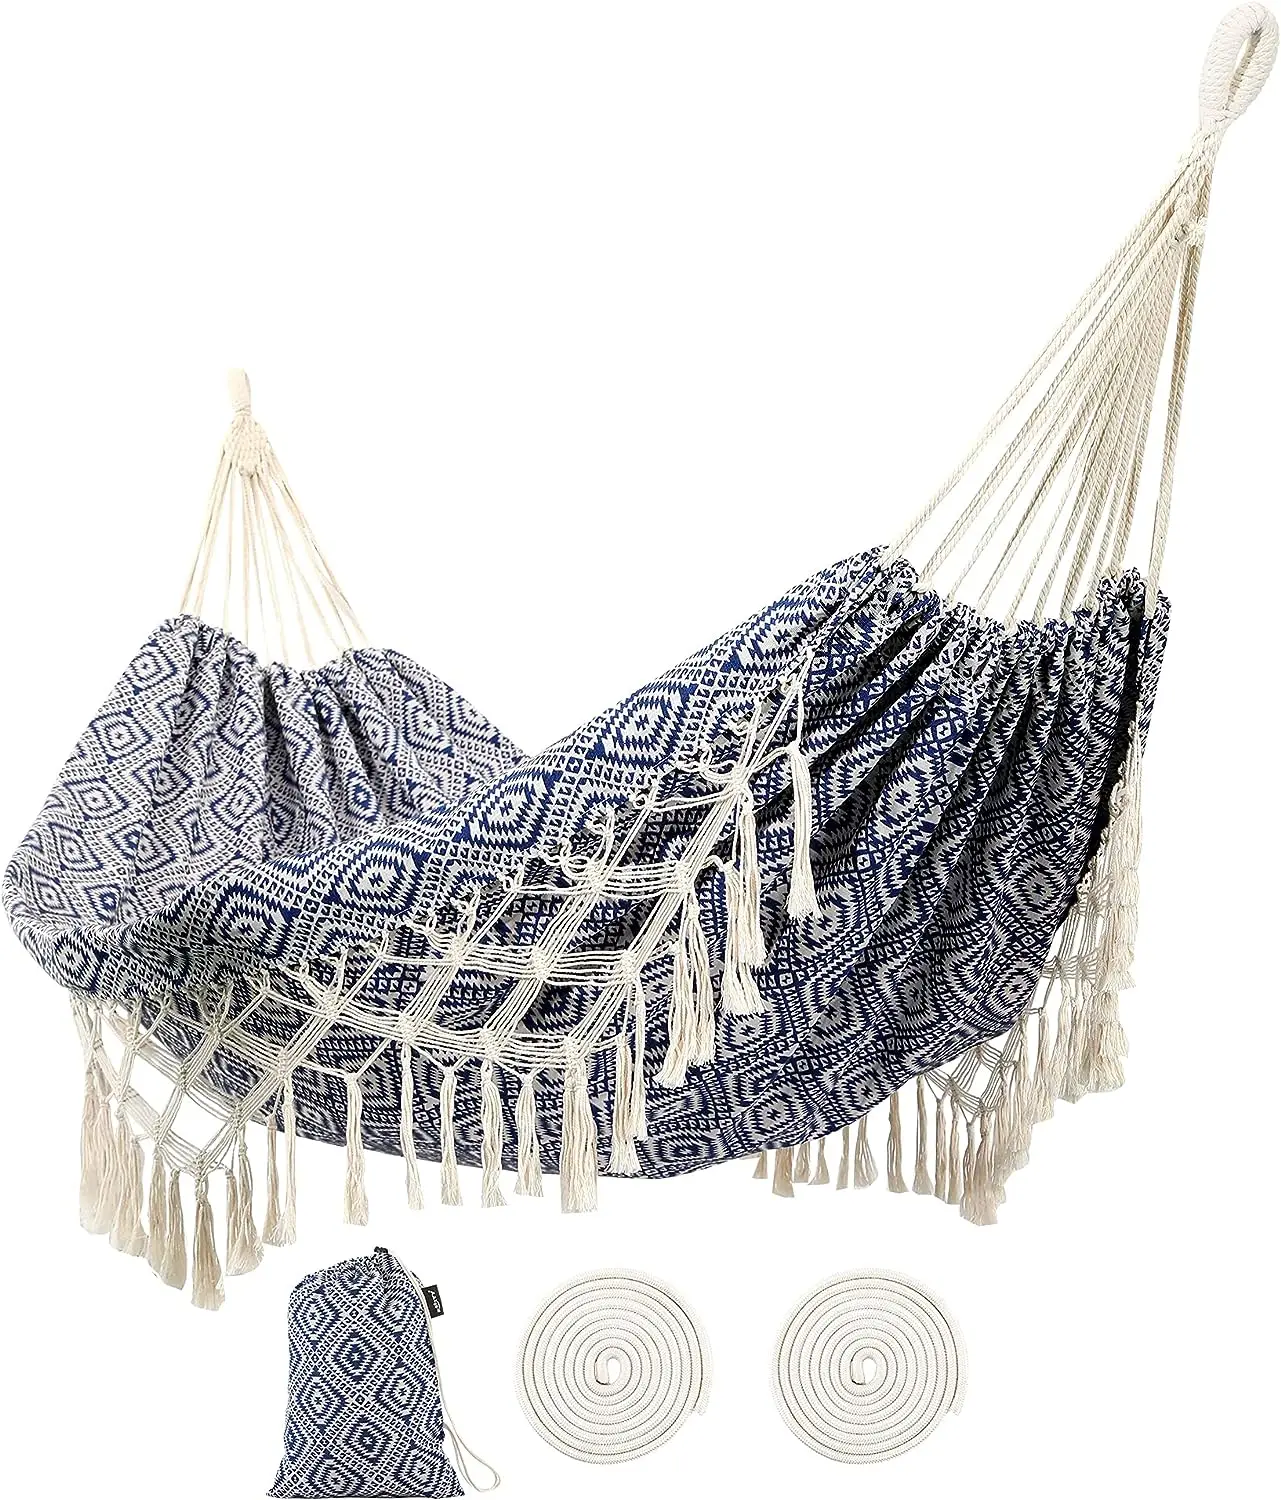 

Hammock with Tassels,Garden Hammocks with Portable Carry,Bag Macrame Fringe for ,Garden,Backyard,Beach,Outdoor and Indoor Porch